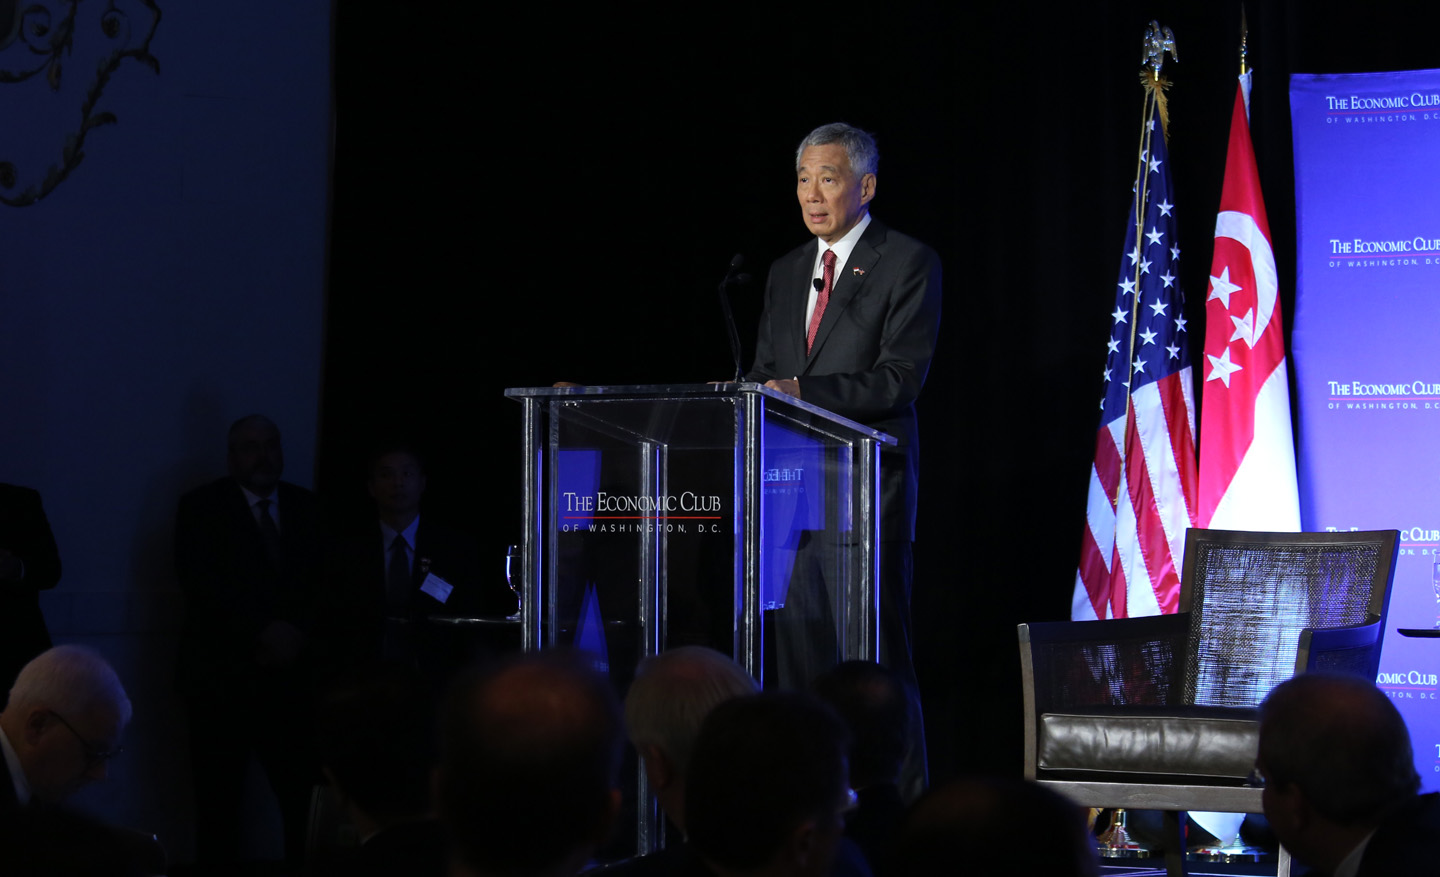 PM Lee Hsien Loong at Economic Club of Washington DC on 23 Oct 2017 (MCI Photo by Kenji Soon)